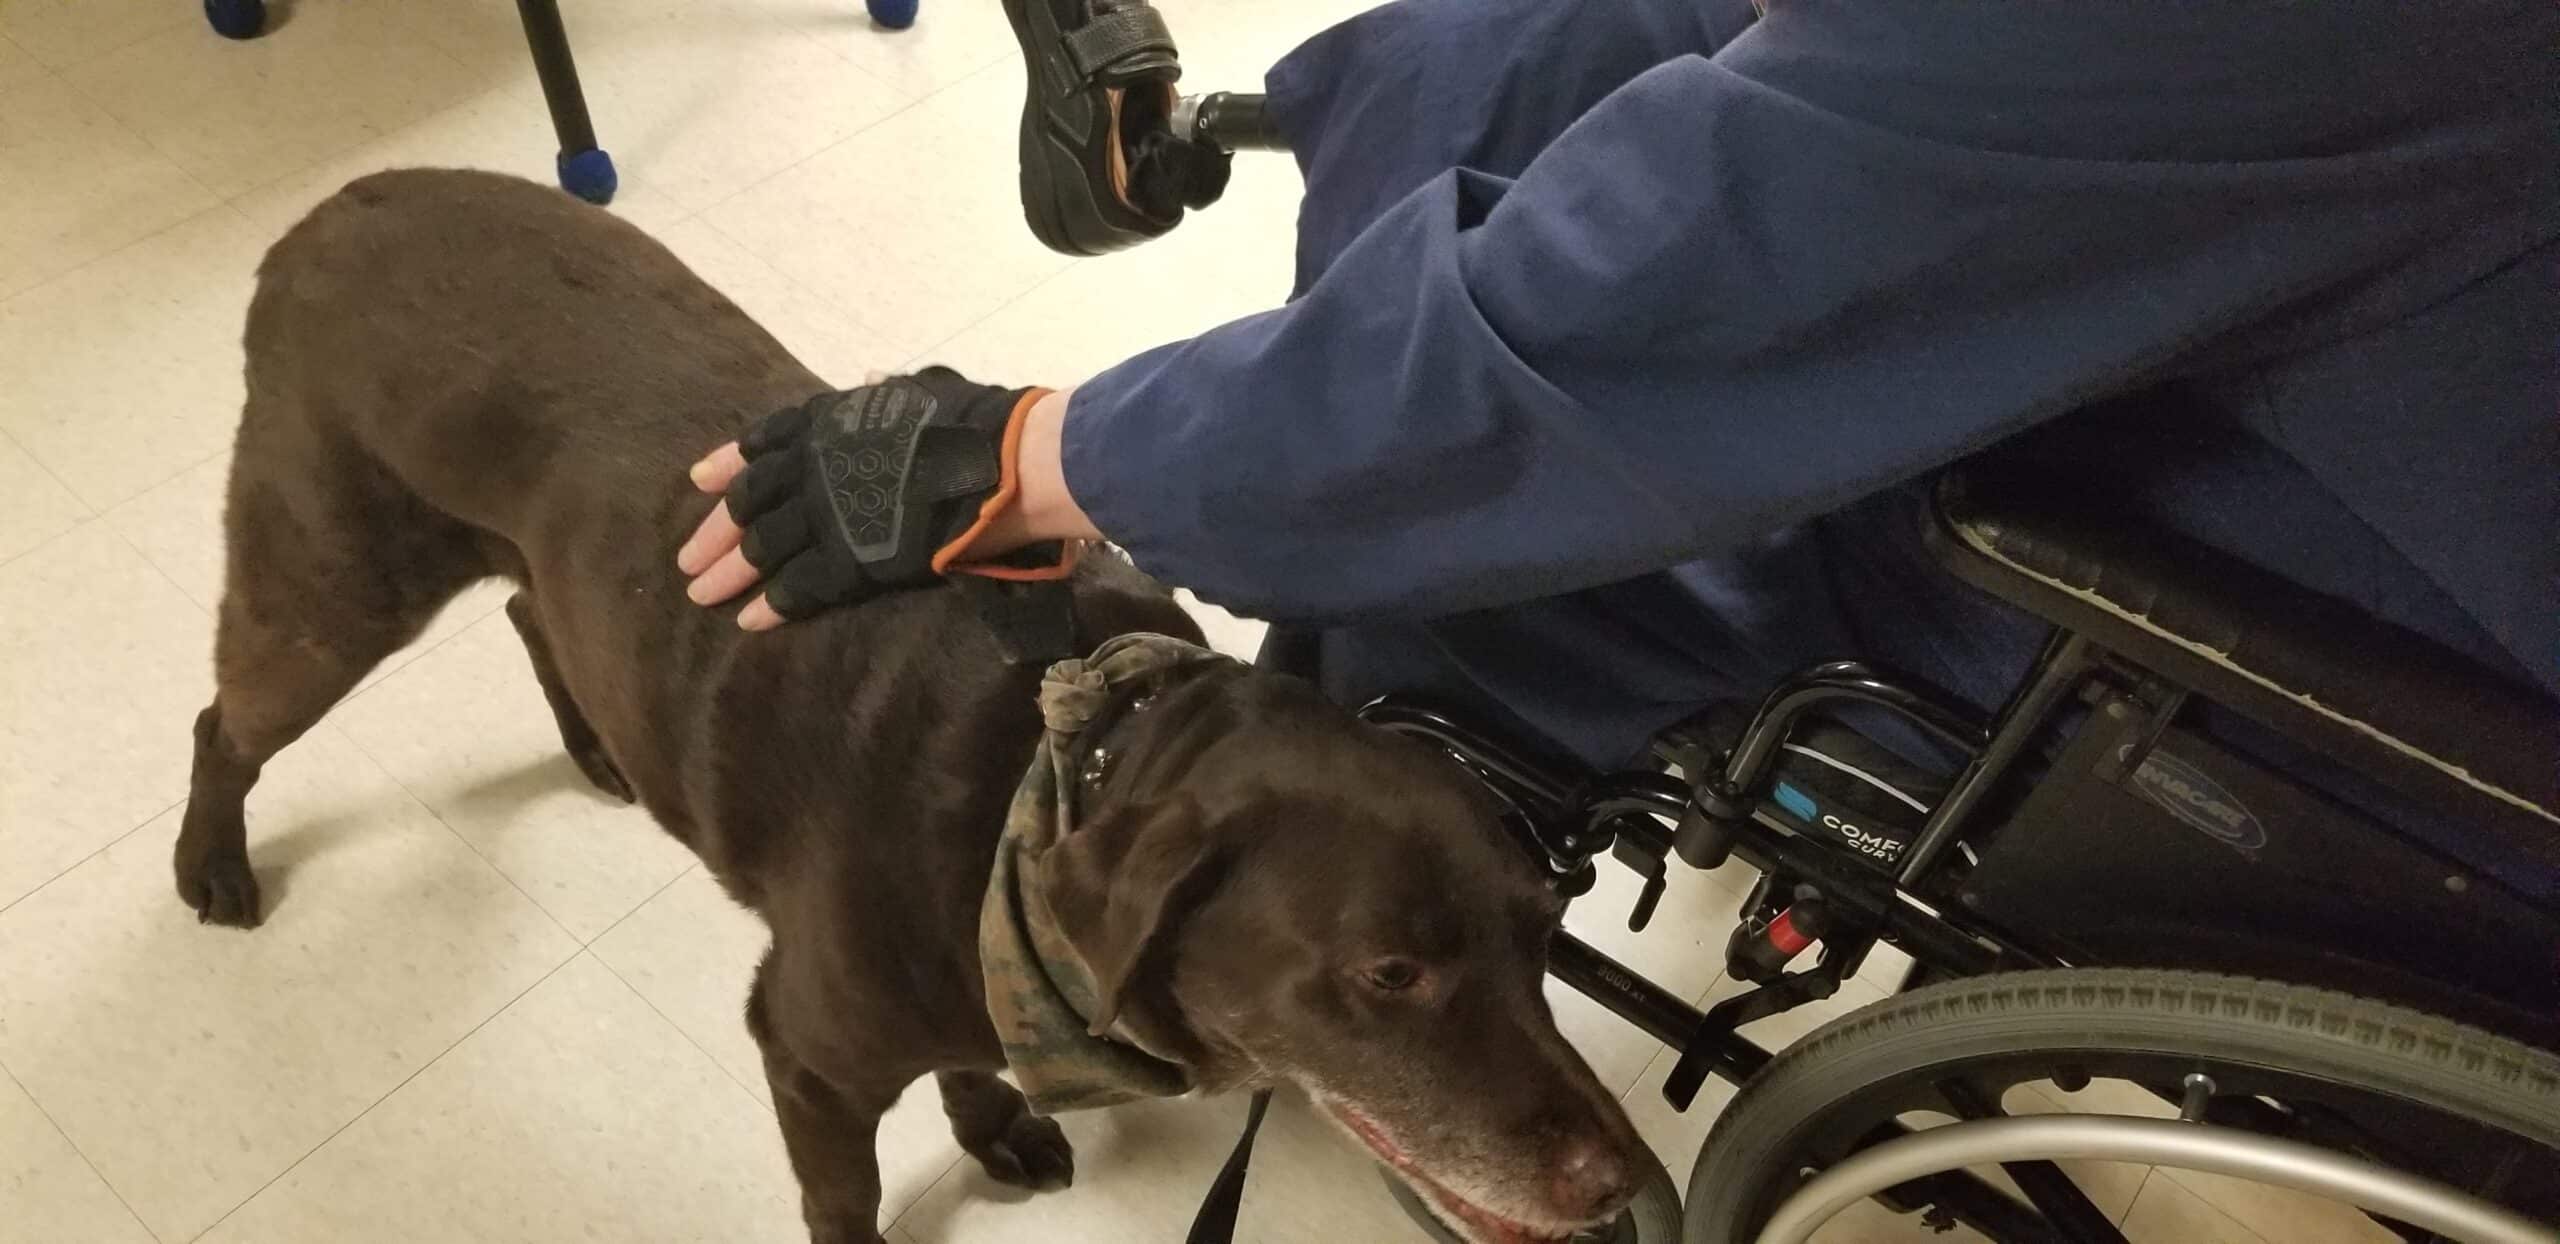 Wilson, a chocolate Labrador therapy dog, is petted by a person using a wheelchair who has a prosthetic limb.